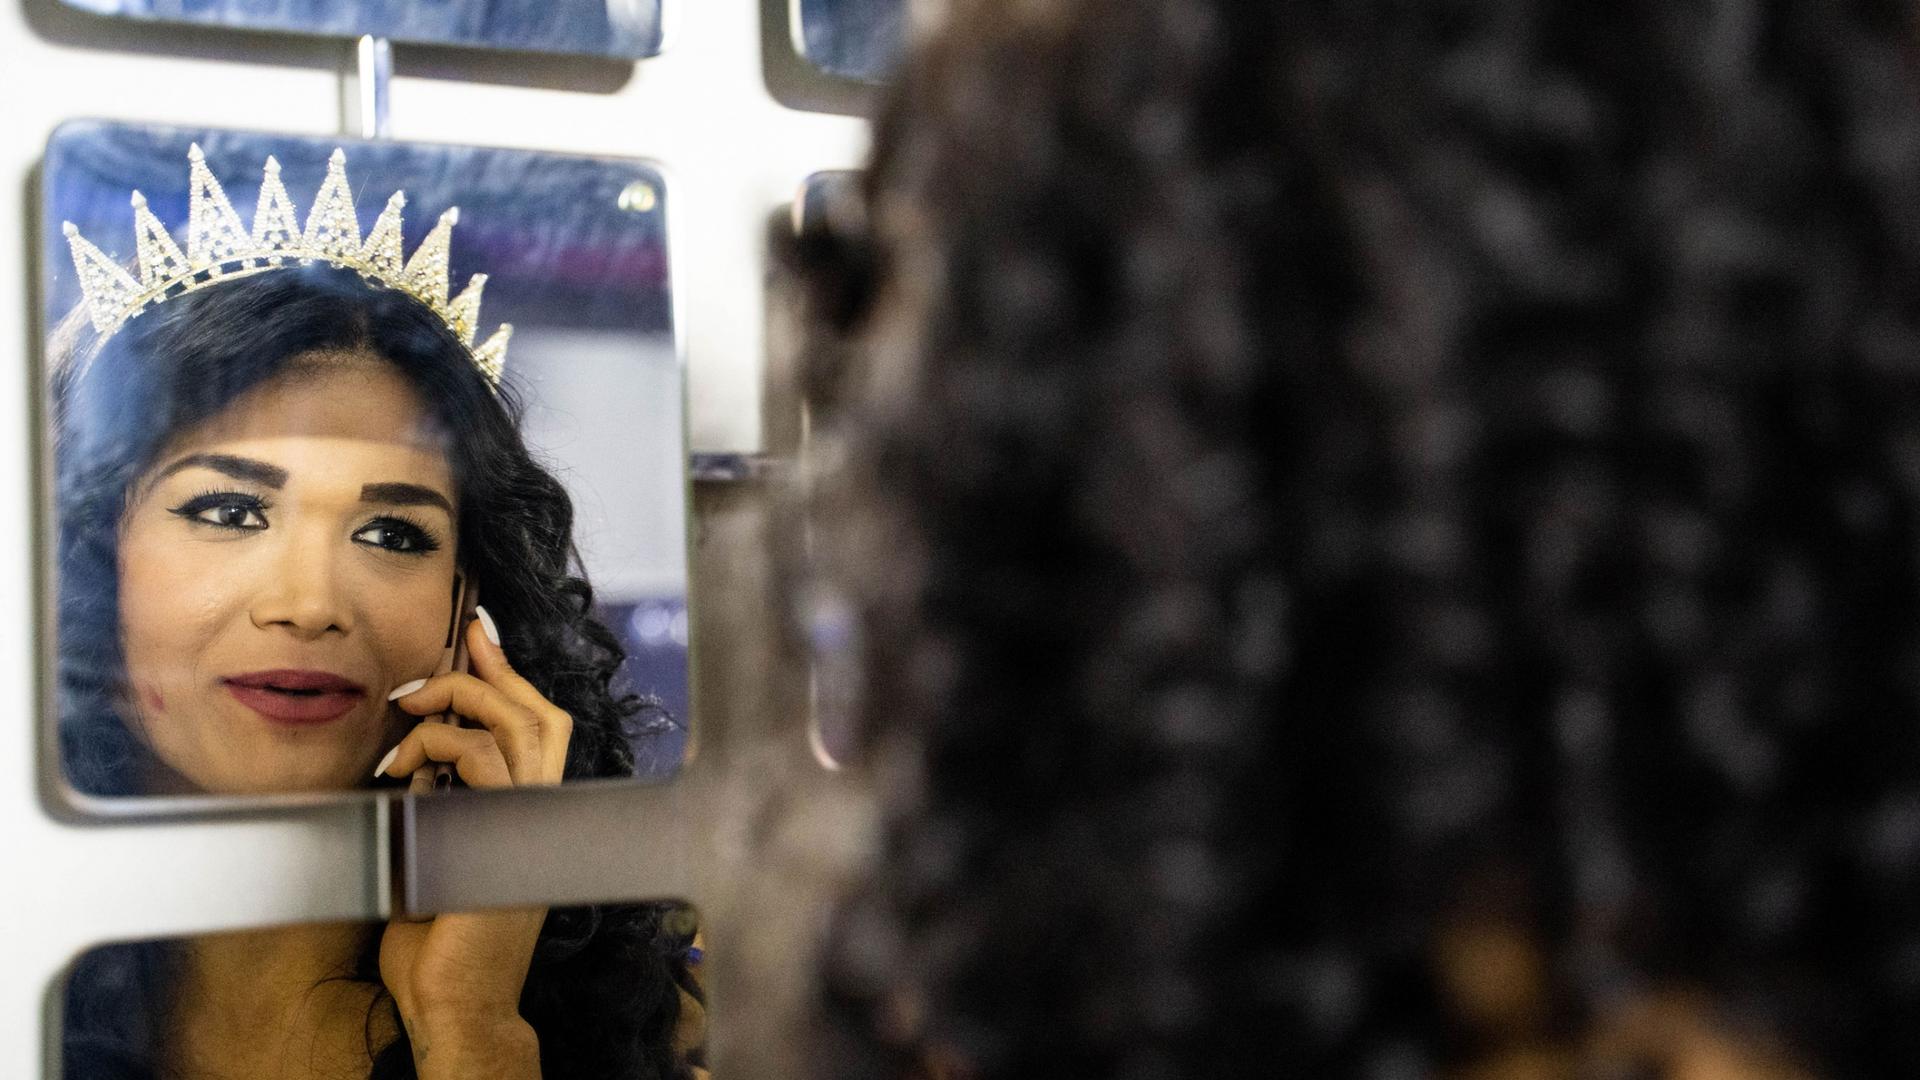 A transgender woman is shown in the reflection of a mirror holding a phone to her hear and wearing a crown.